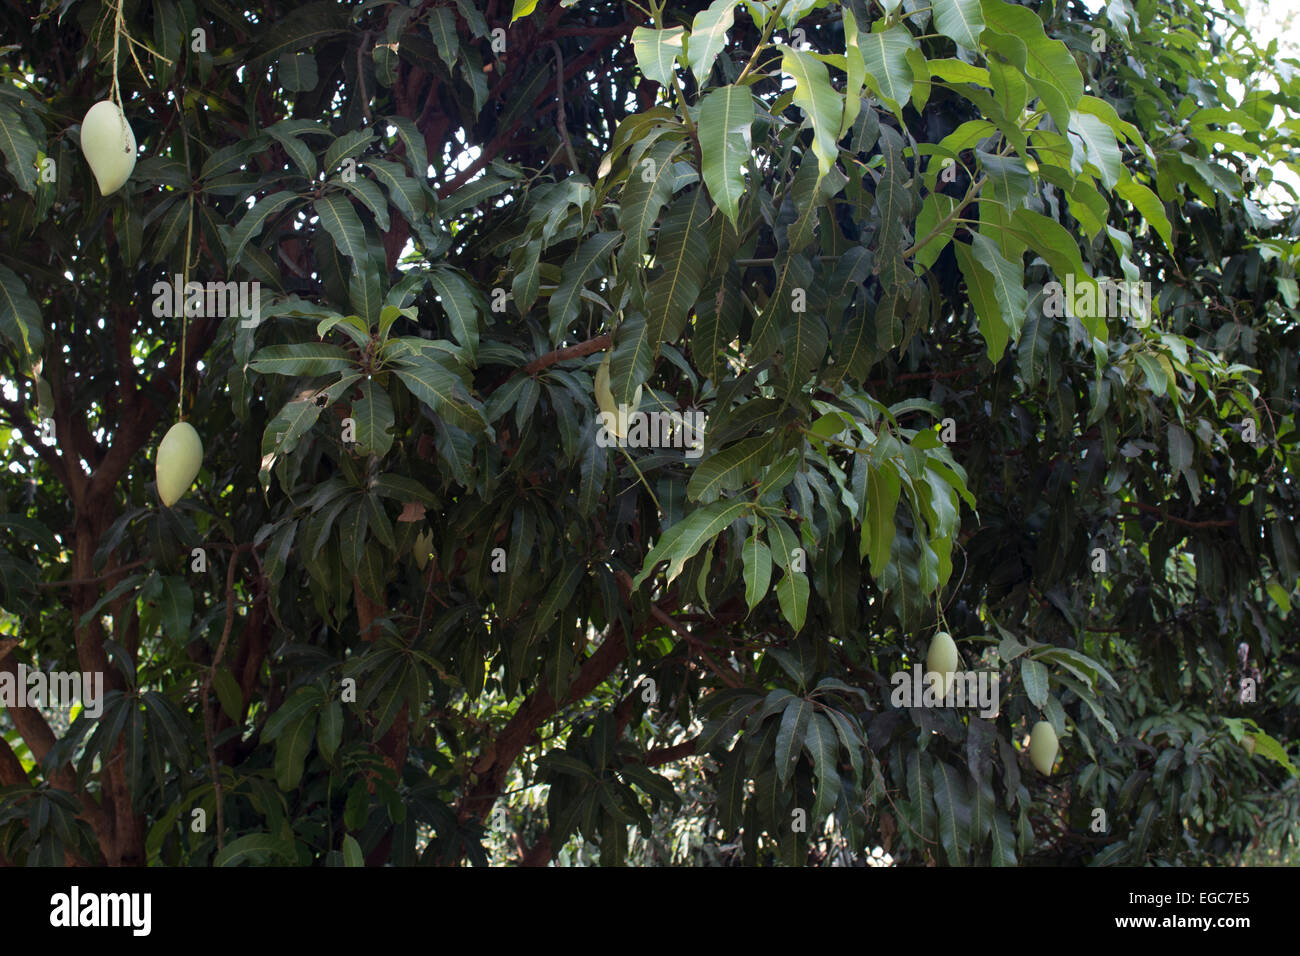 Mango tree=a with mangoes growing in Thailand Stock Photo